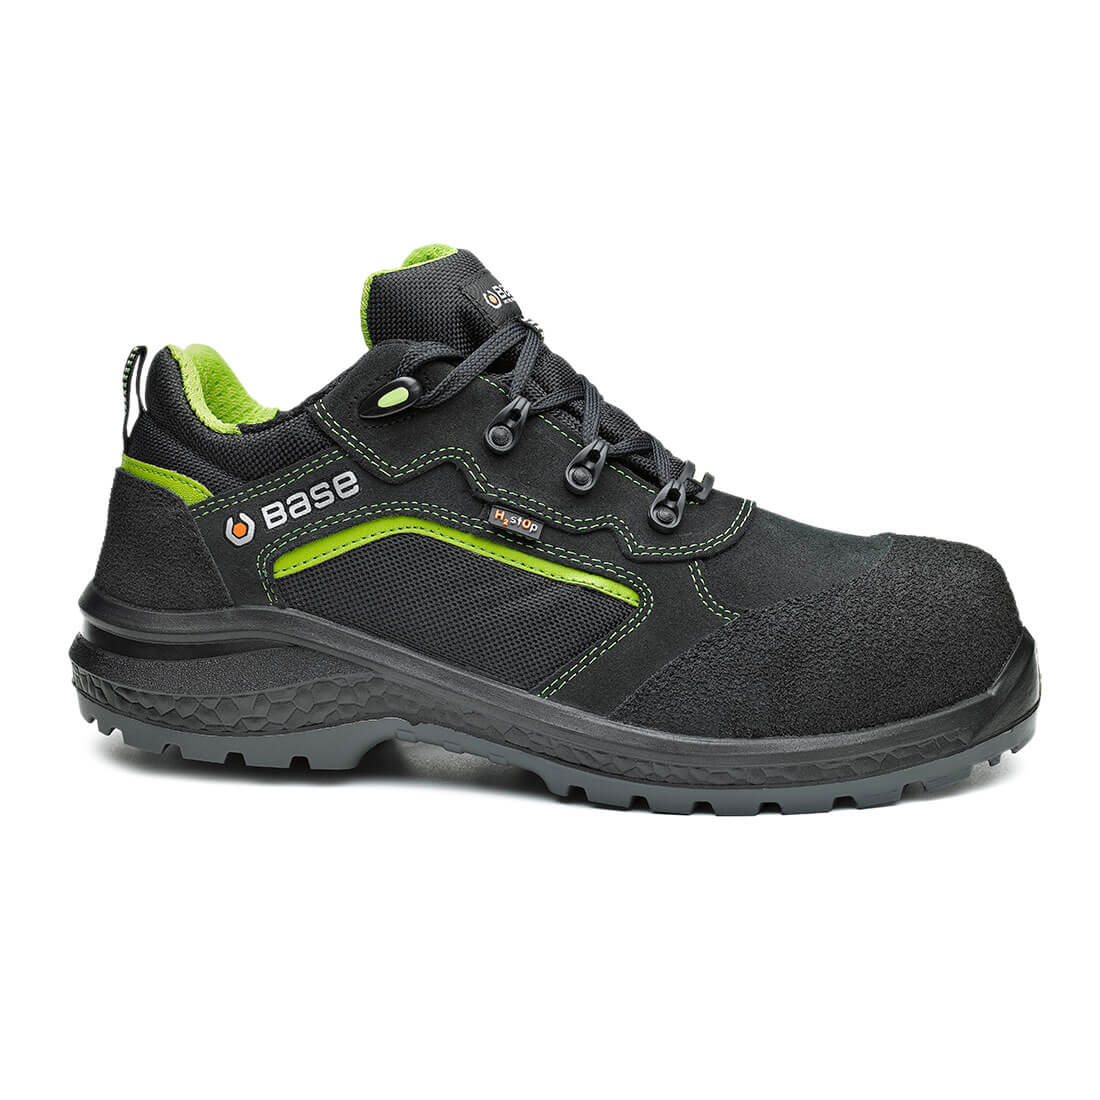 Base Be-Powerful Toe Cap Work Safety Shoes Black/Green 1#colour_black-green